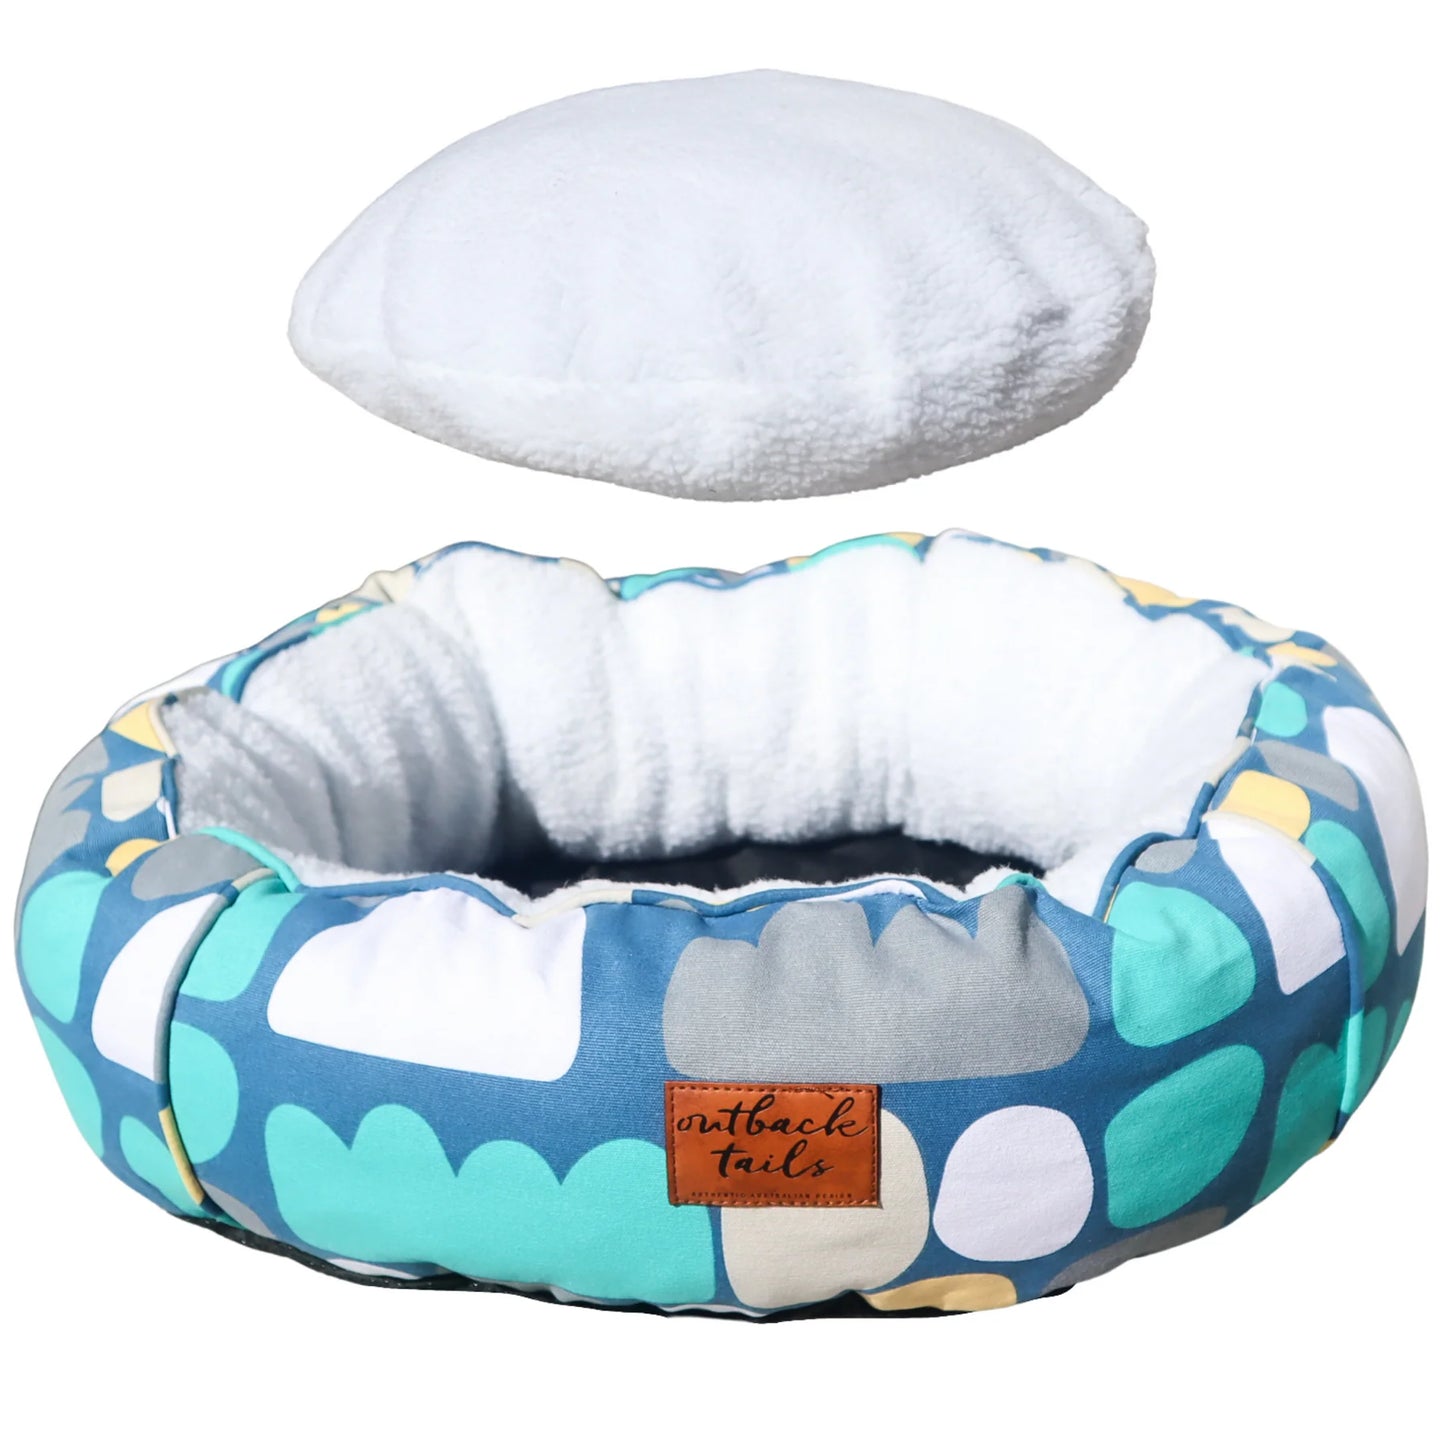 Outback Tails - Fleecy Round Dog Bed - Puli Puli Blue